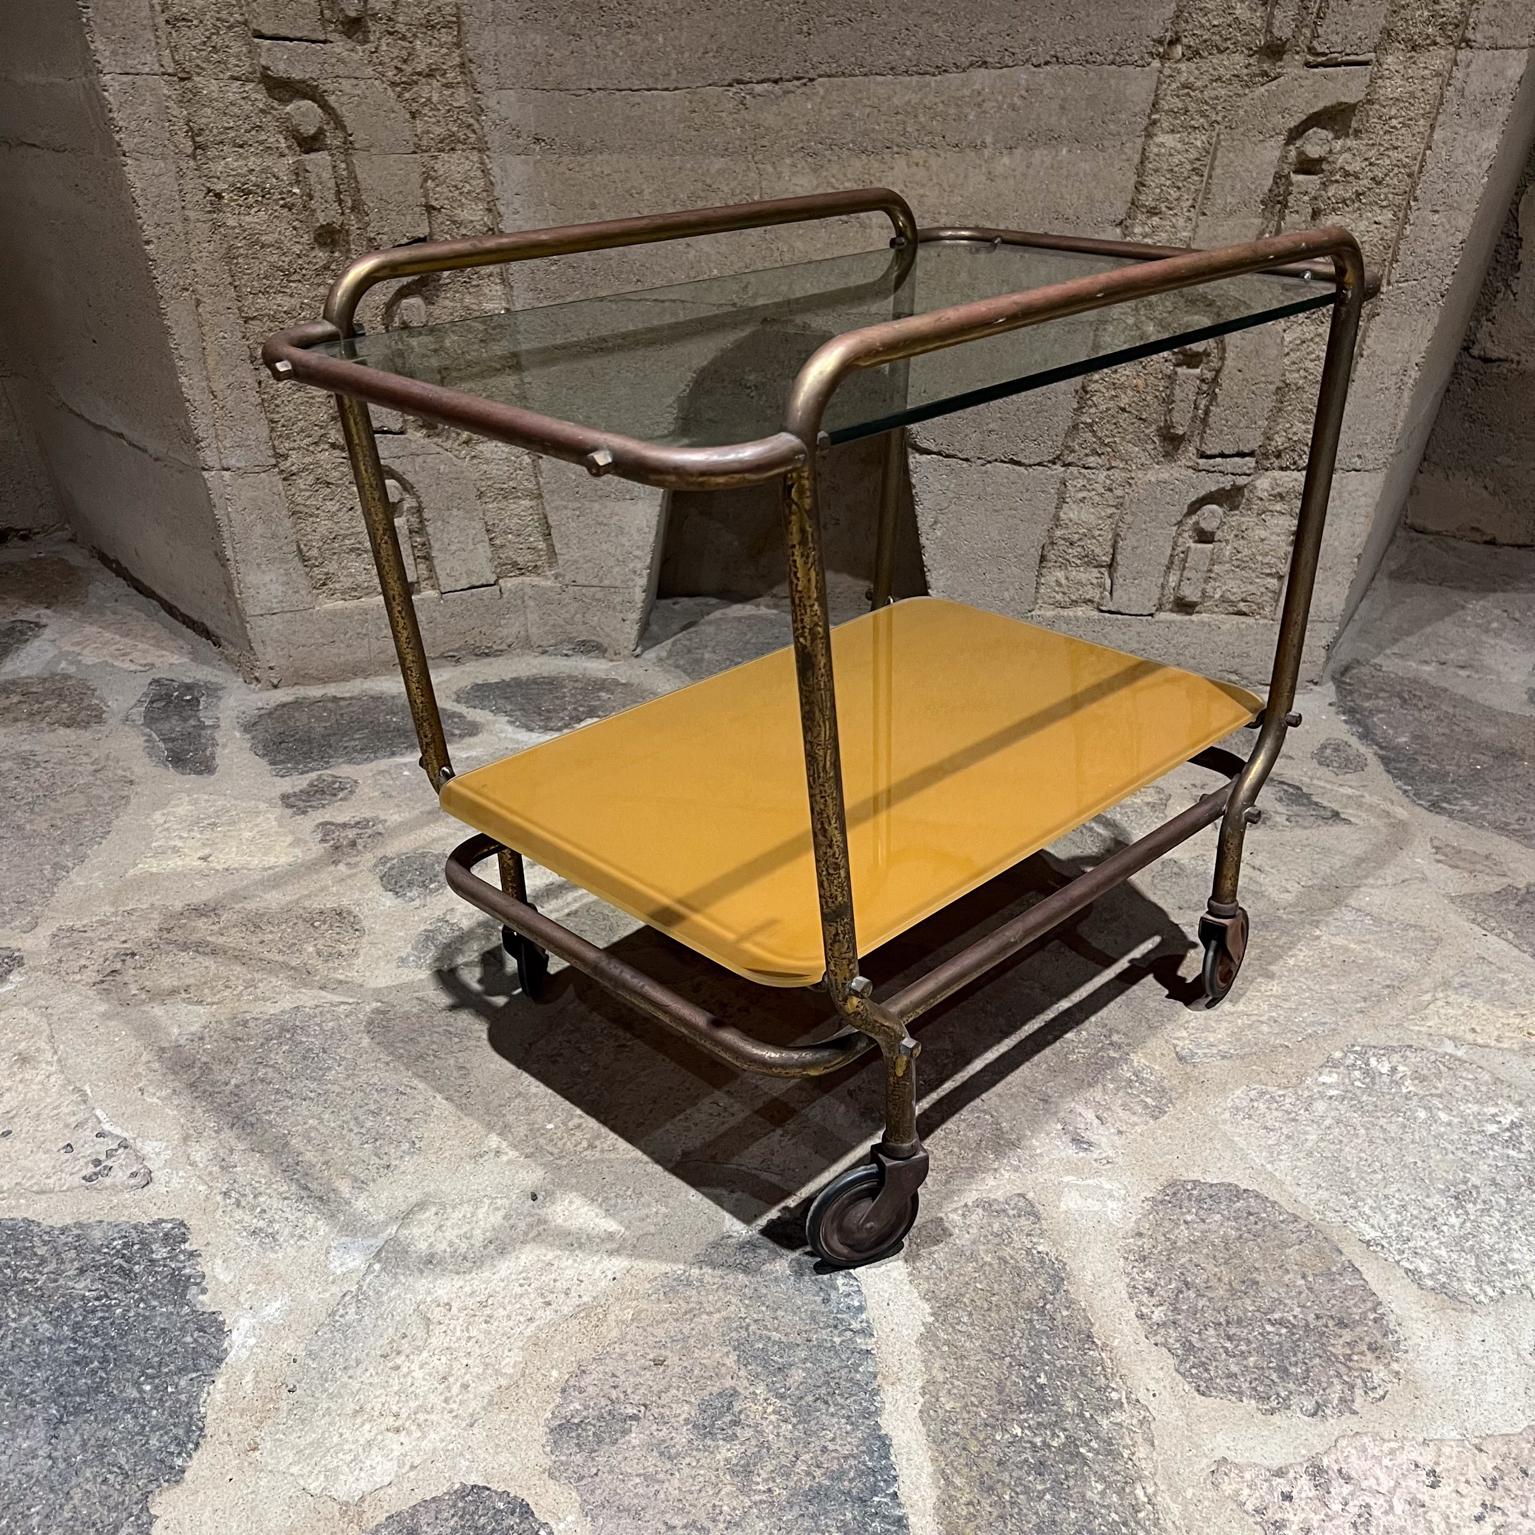 1950s Mexico lovely vintage Modern Brass Service Cart by Arturo Pani.
Body construction tubular brass. Original vintage wheels.
Cart comes with new glass top.
Vintage preowned condition unrestored brass has original vintage patina.
23 h x 26.5 w x